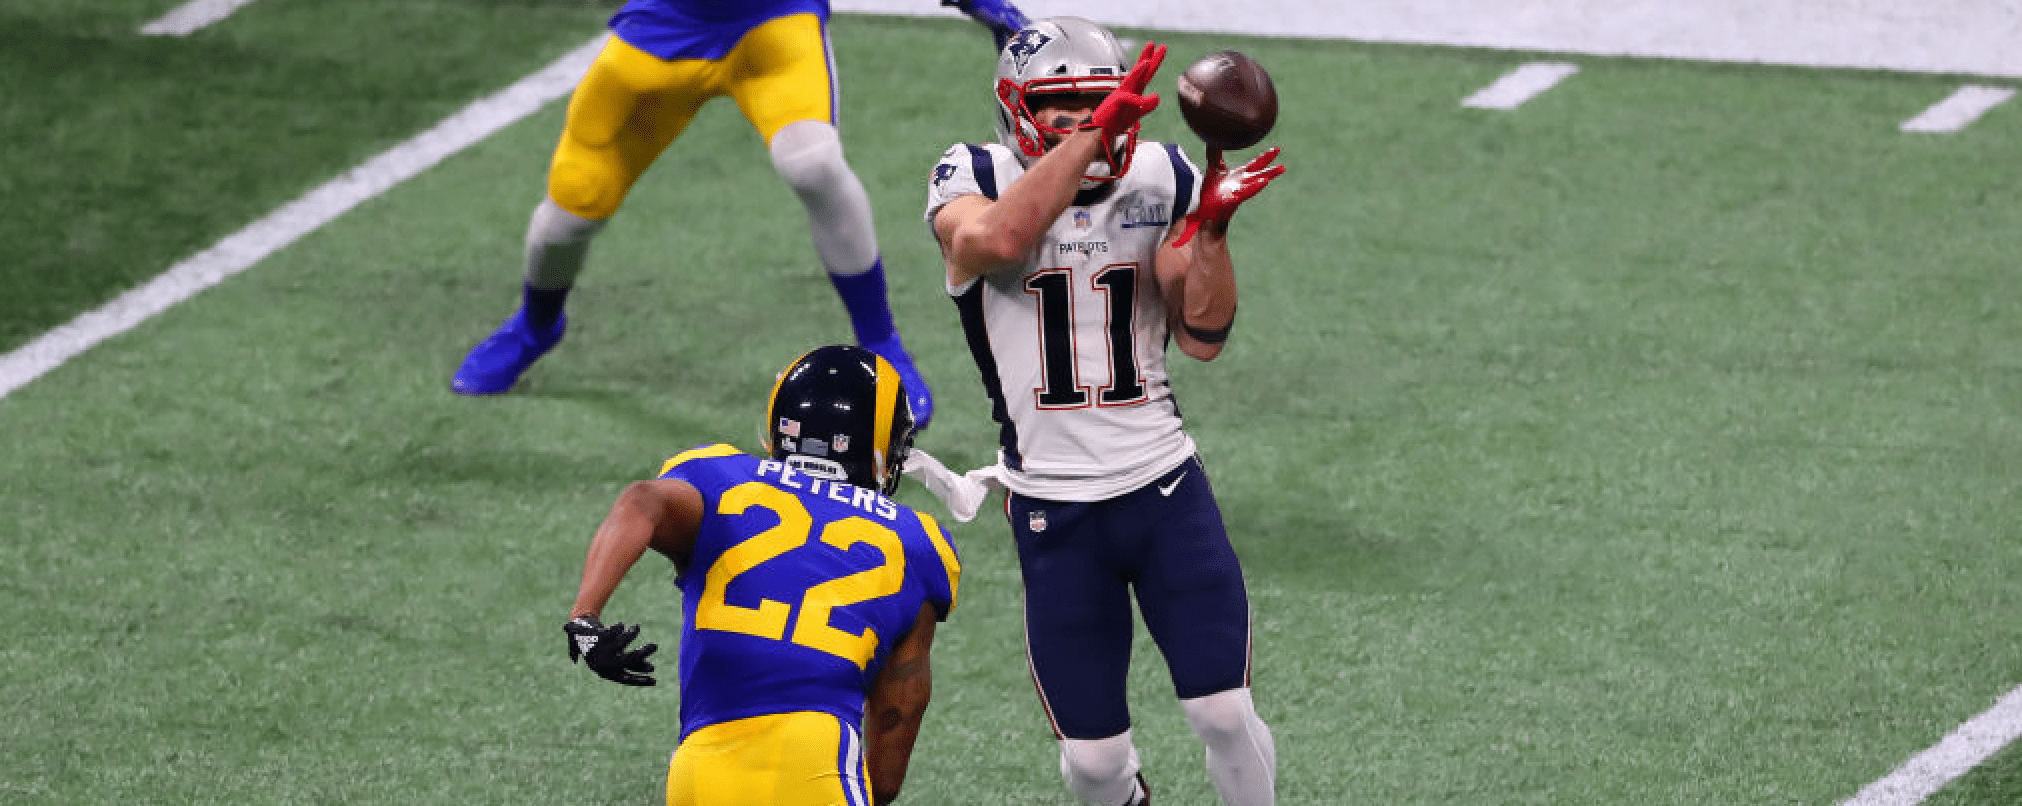 ATLANTA, GA - FEBRUARY 03: New England Patriots wide receiver Julian Edelman (11) makes a catch during Super Bowl LIII between the Los Angeles Rams and the New England Patriots on February 3, 2019 at Mercedes Benz Stadium in Atlanta, GA. (Photo by Rich Graessle/Icon Sportswire via Getty Images)